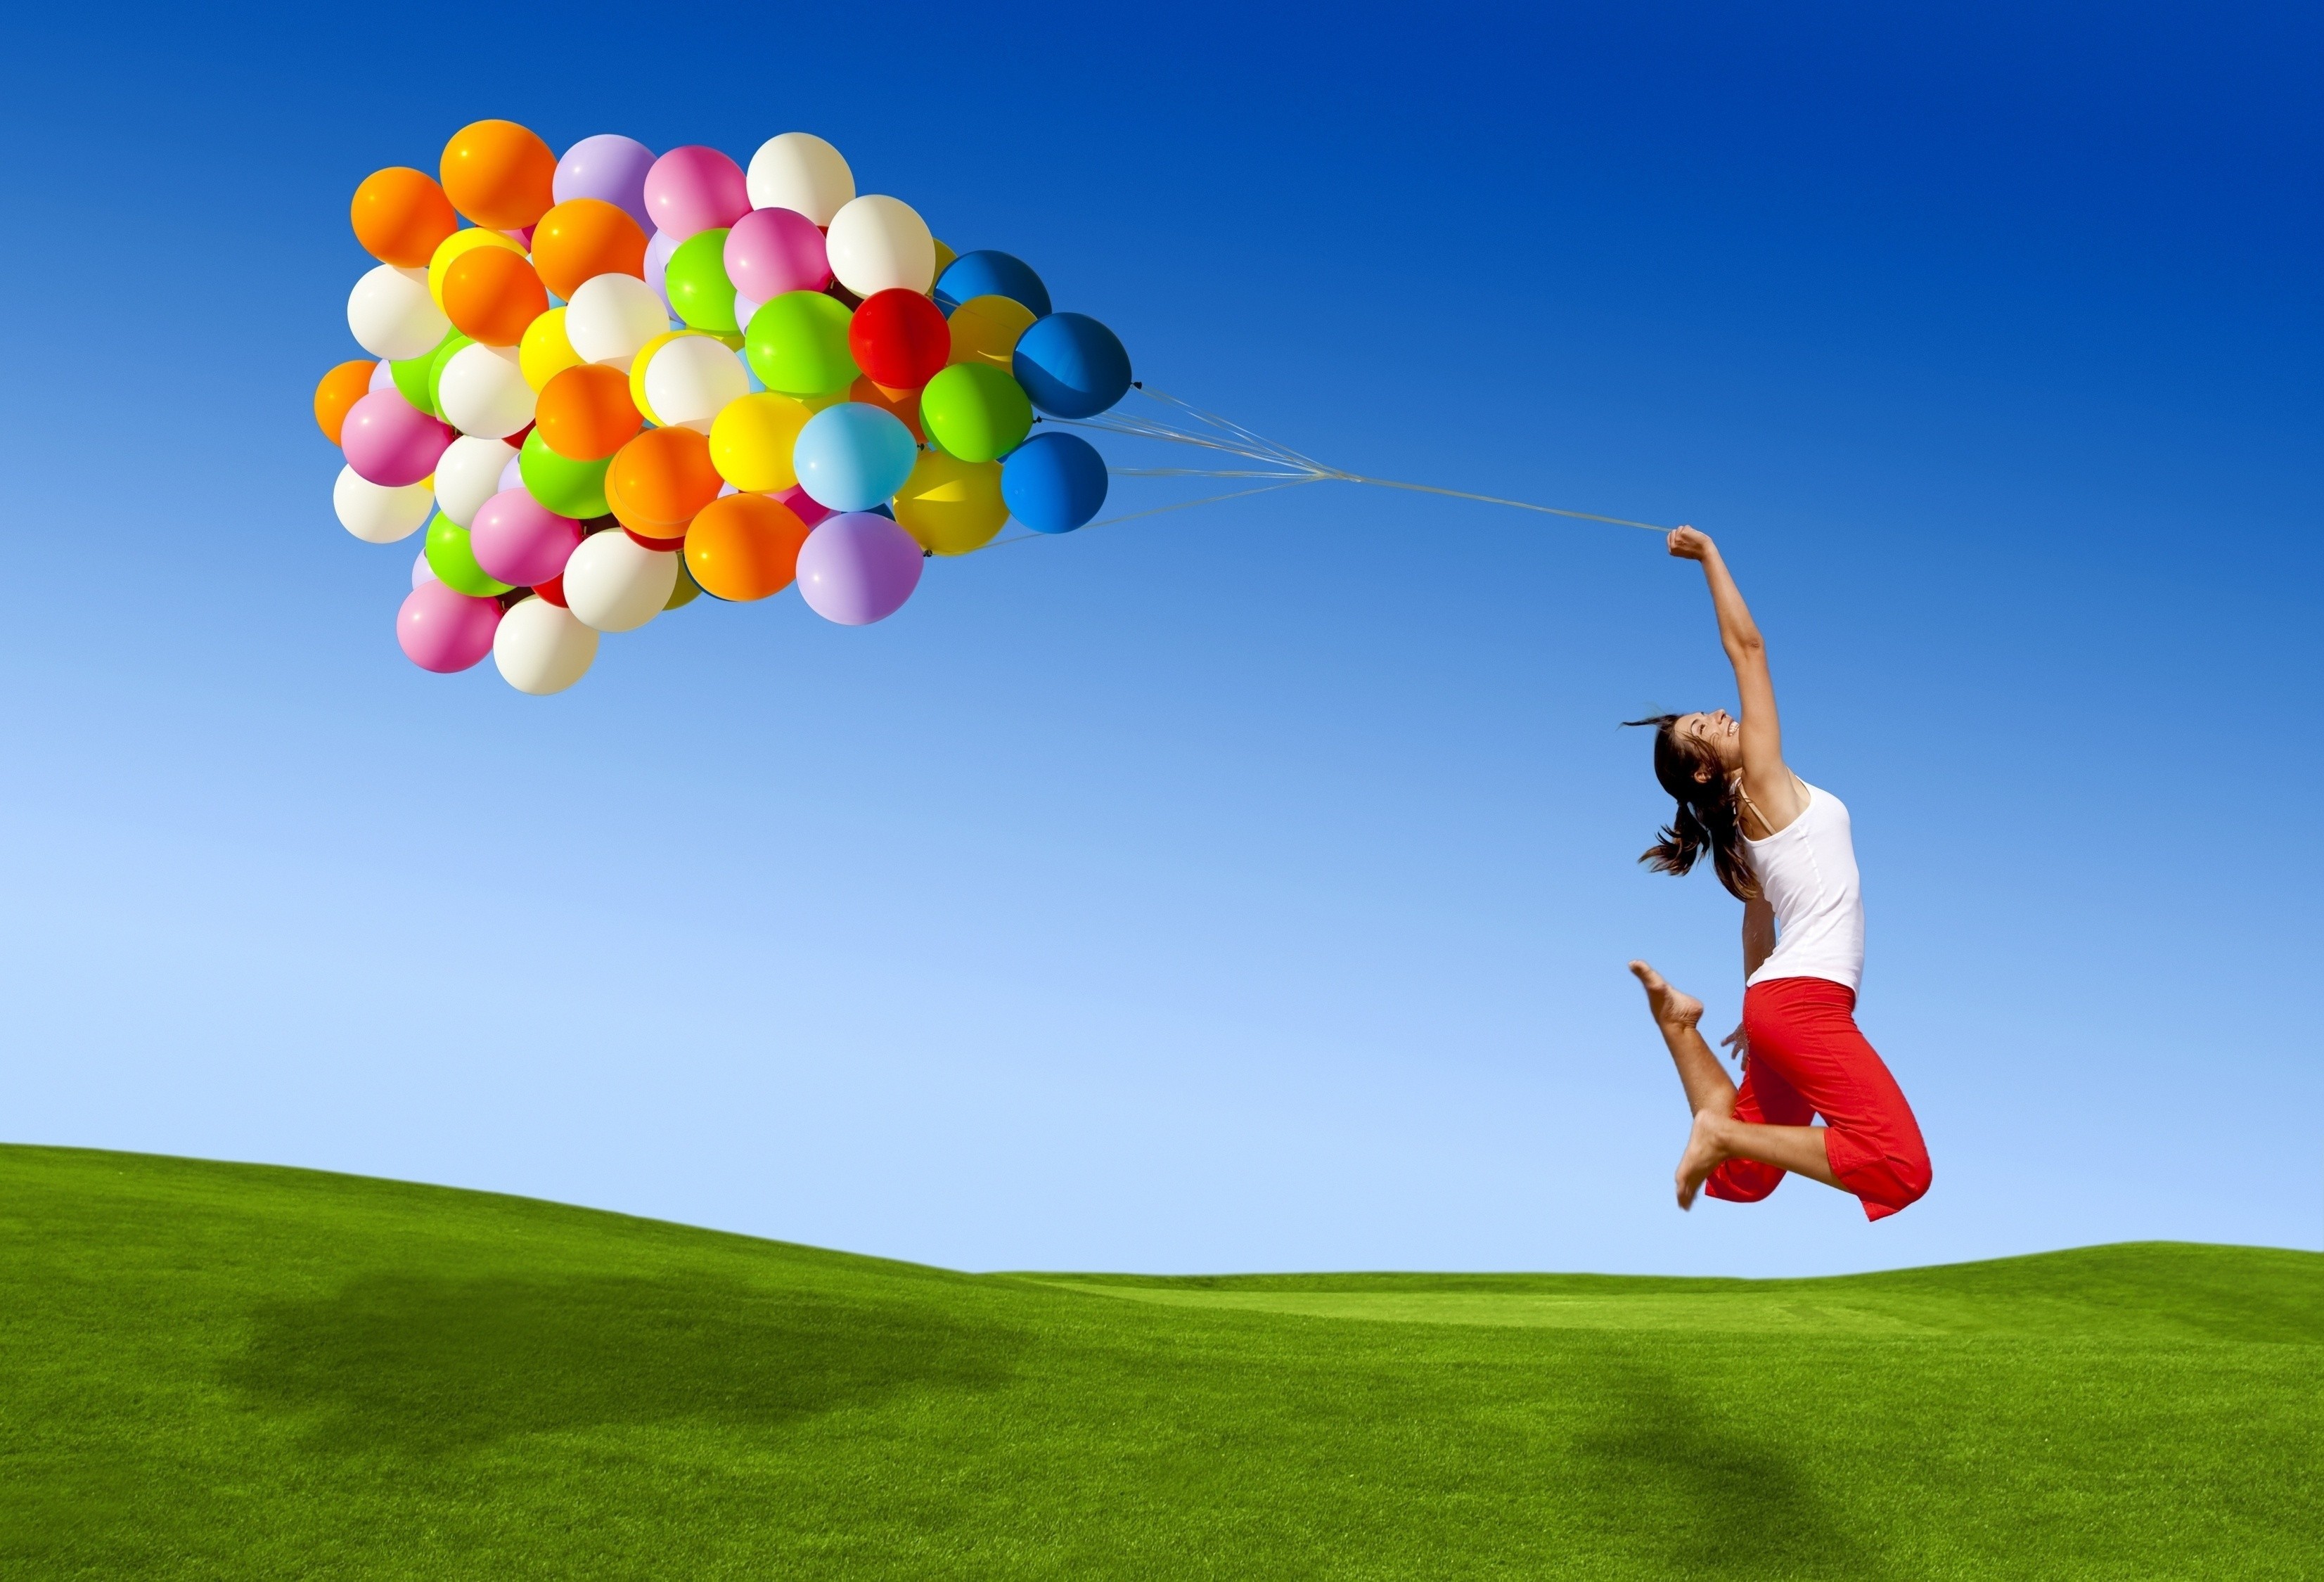 women model landscape nature balloons smiling jumping field grass sky colorful barefoot shadow Wallpaper